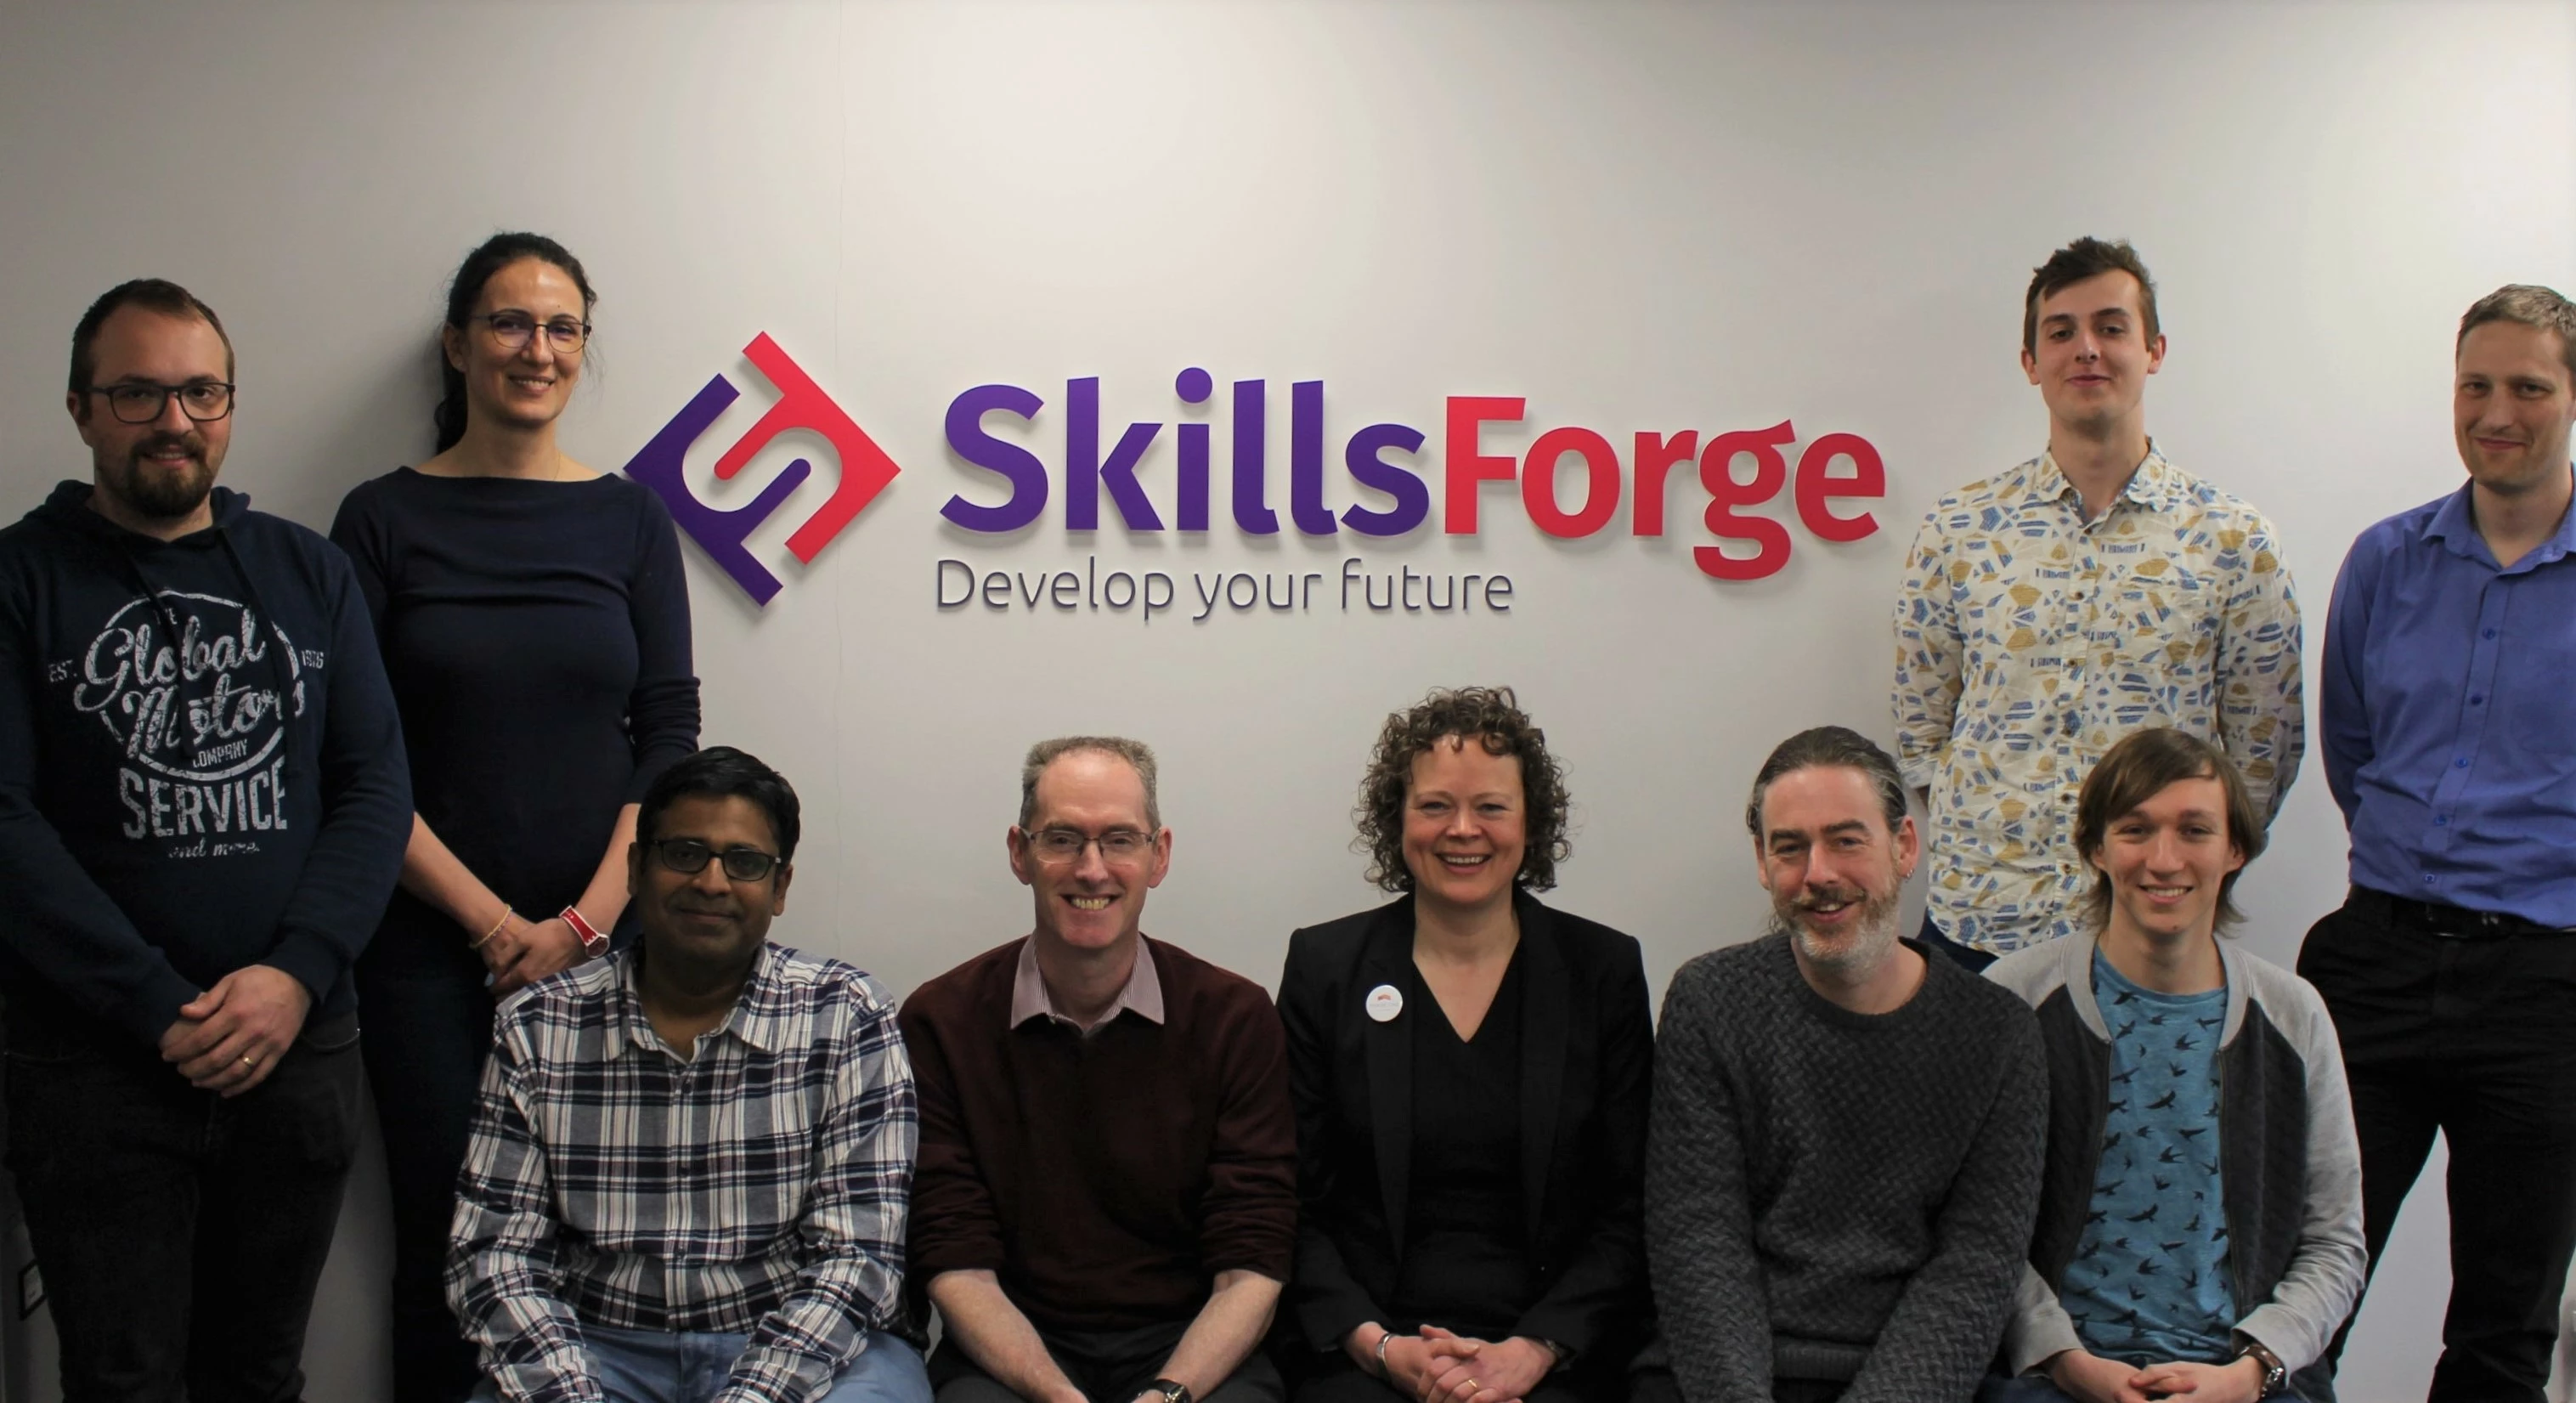 The SkillsForge team with Claire Bennett